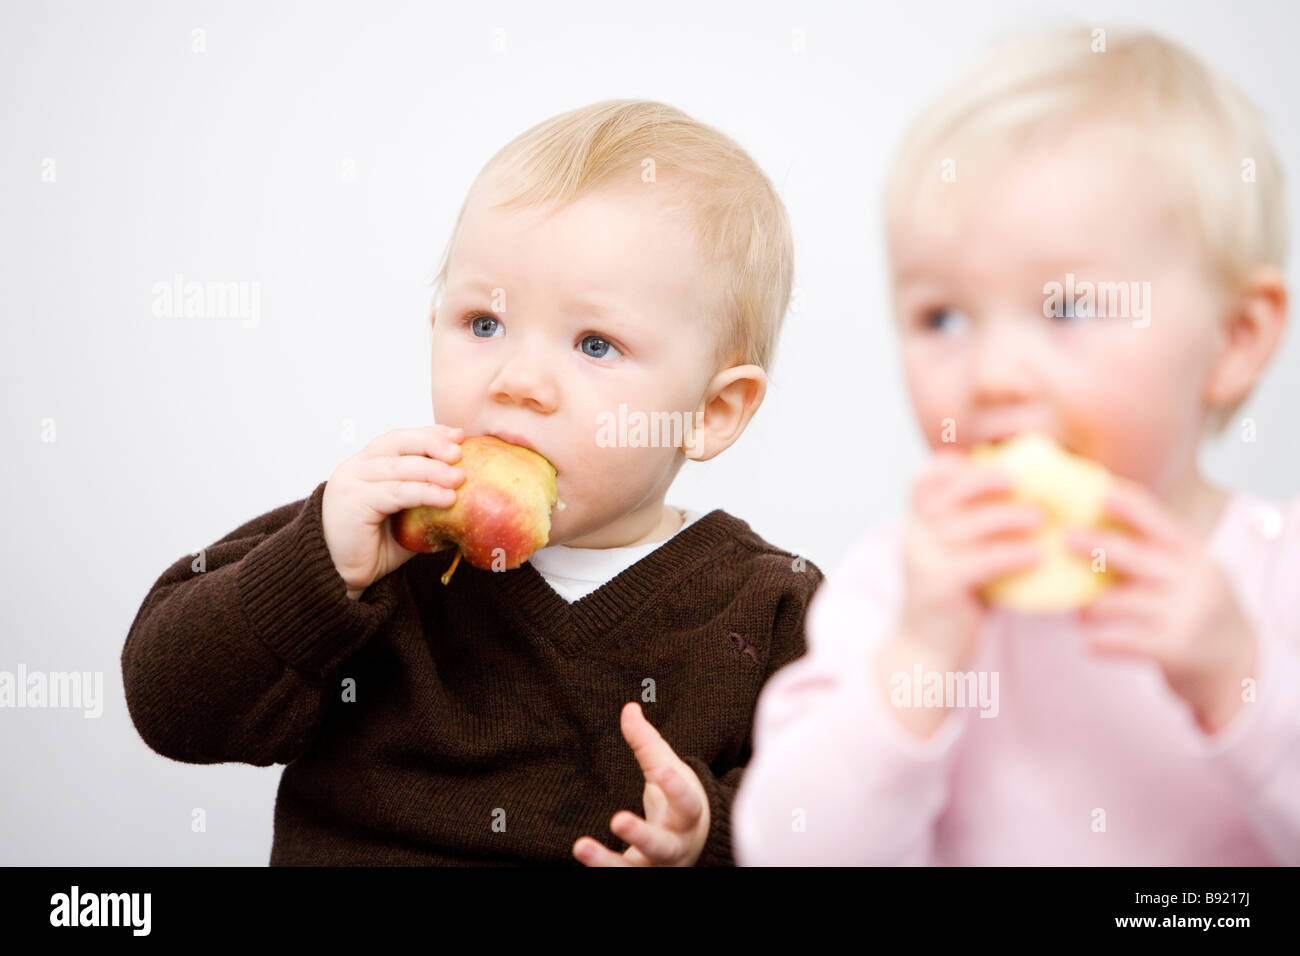 Two babies holding apples Sweden. Stock Photo